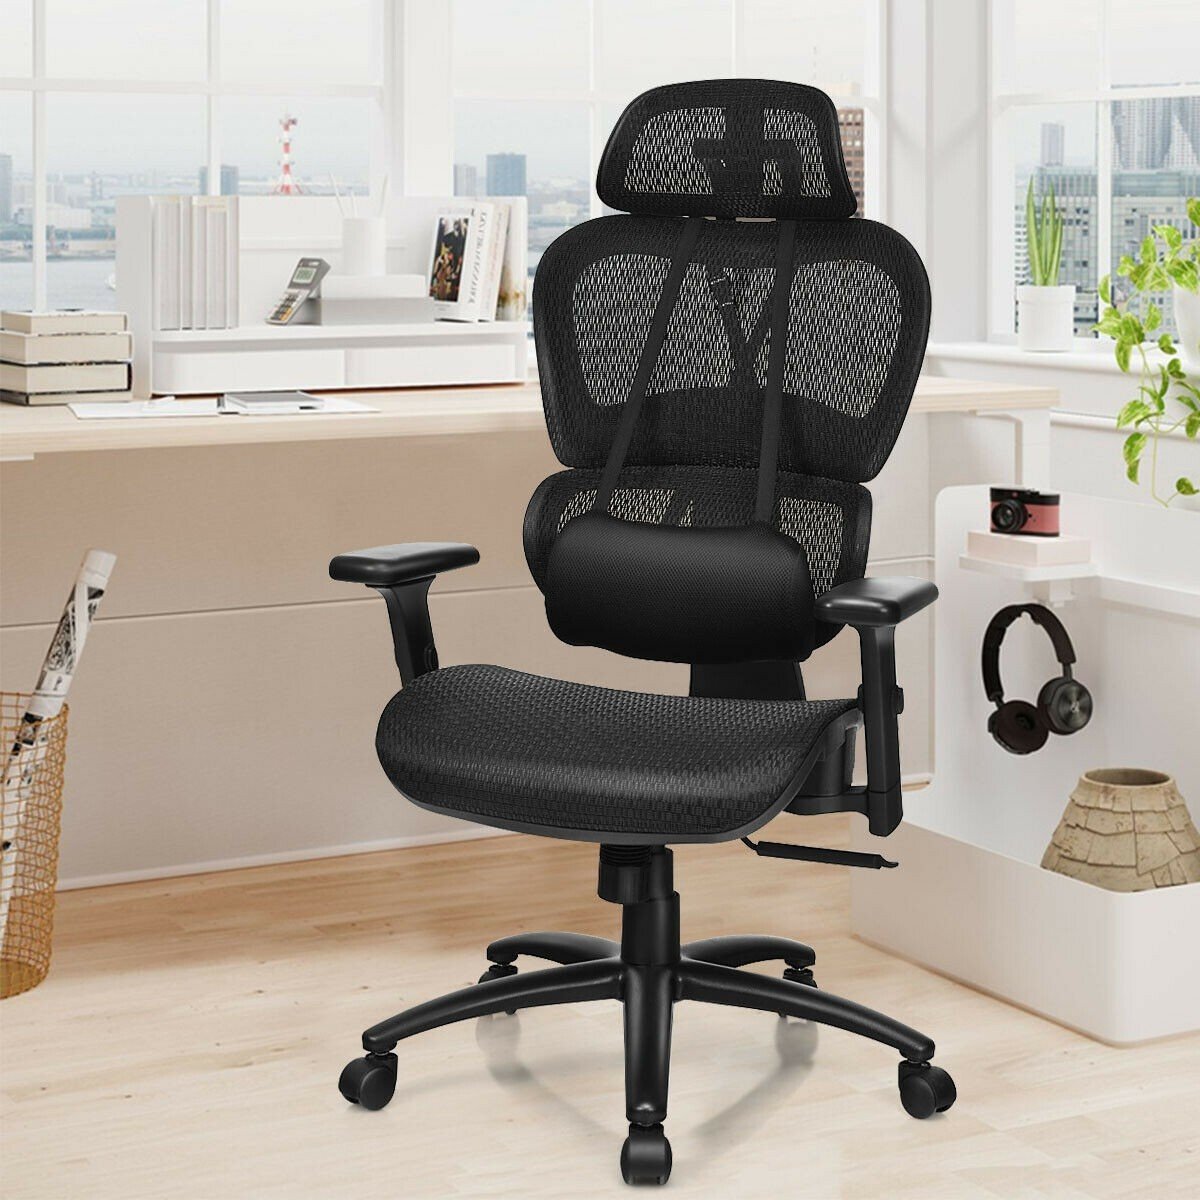 Gaming Chair - Mesh Office Chair Recliner Adjustable Headrest